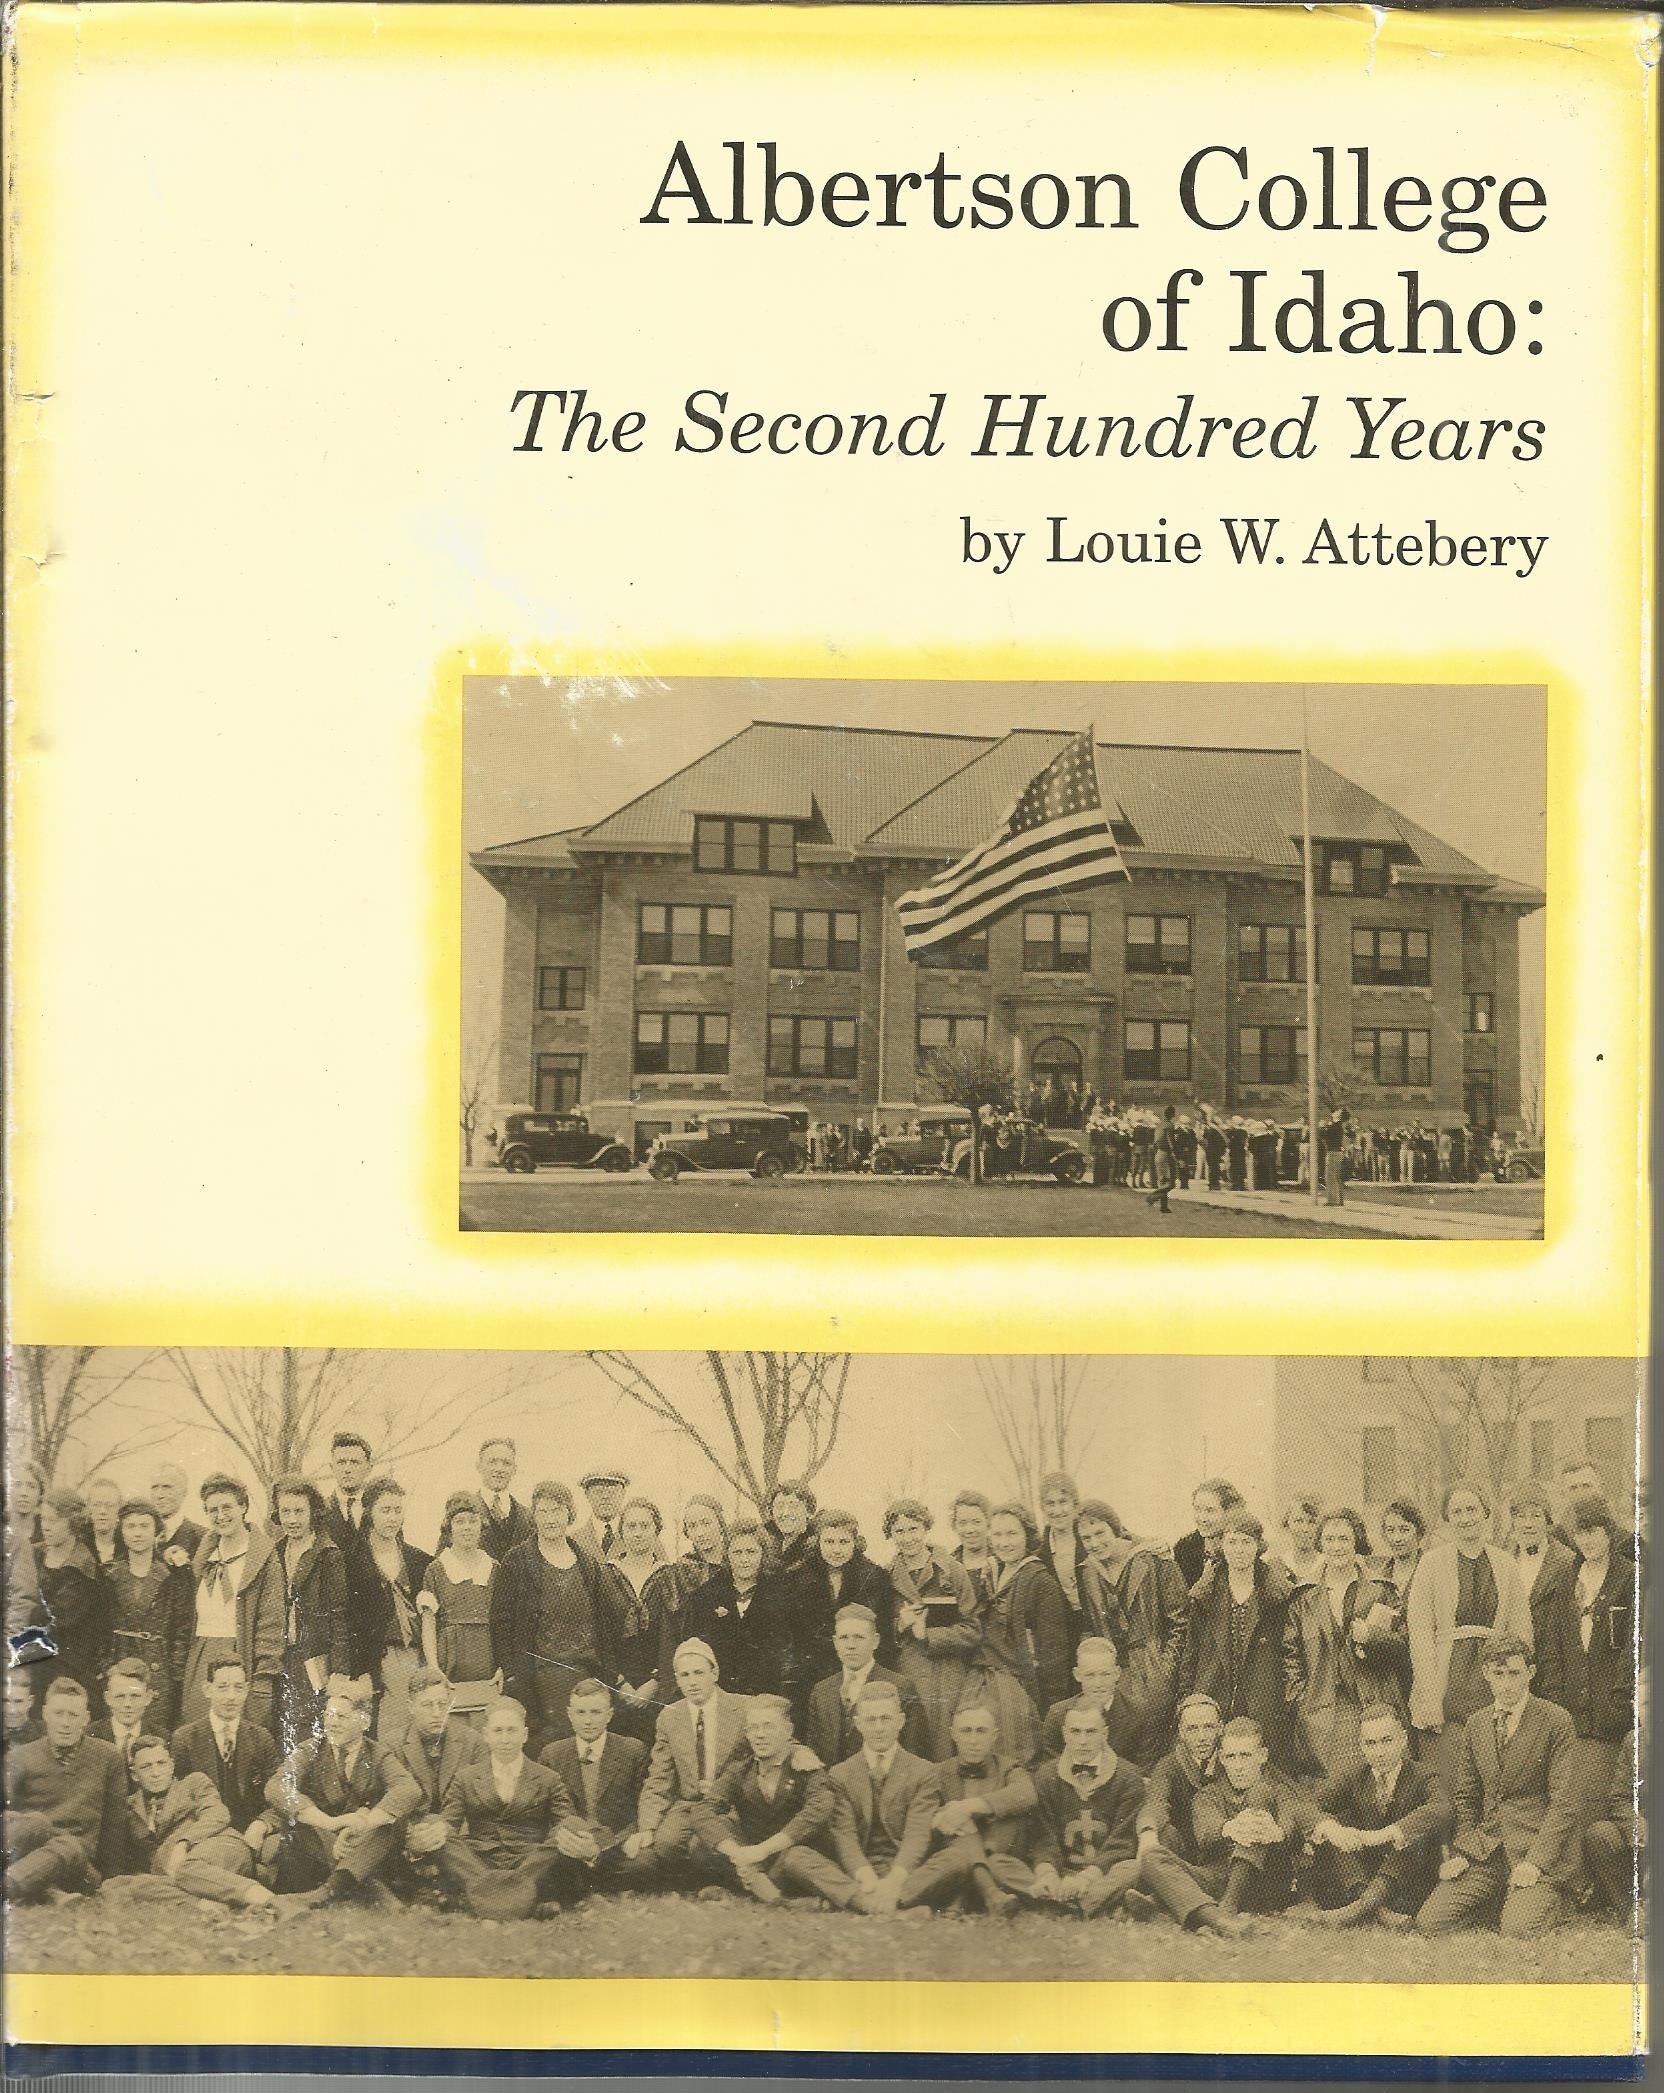 Albertson College of Idaho: The second hundred years (book cover)